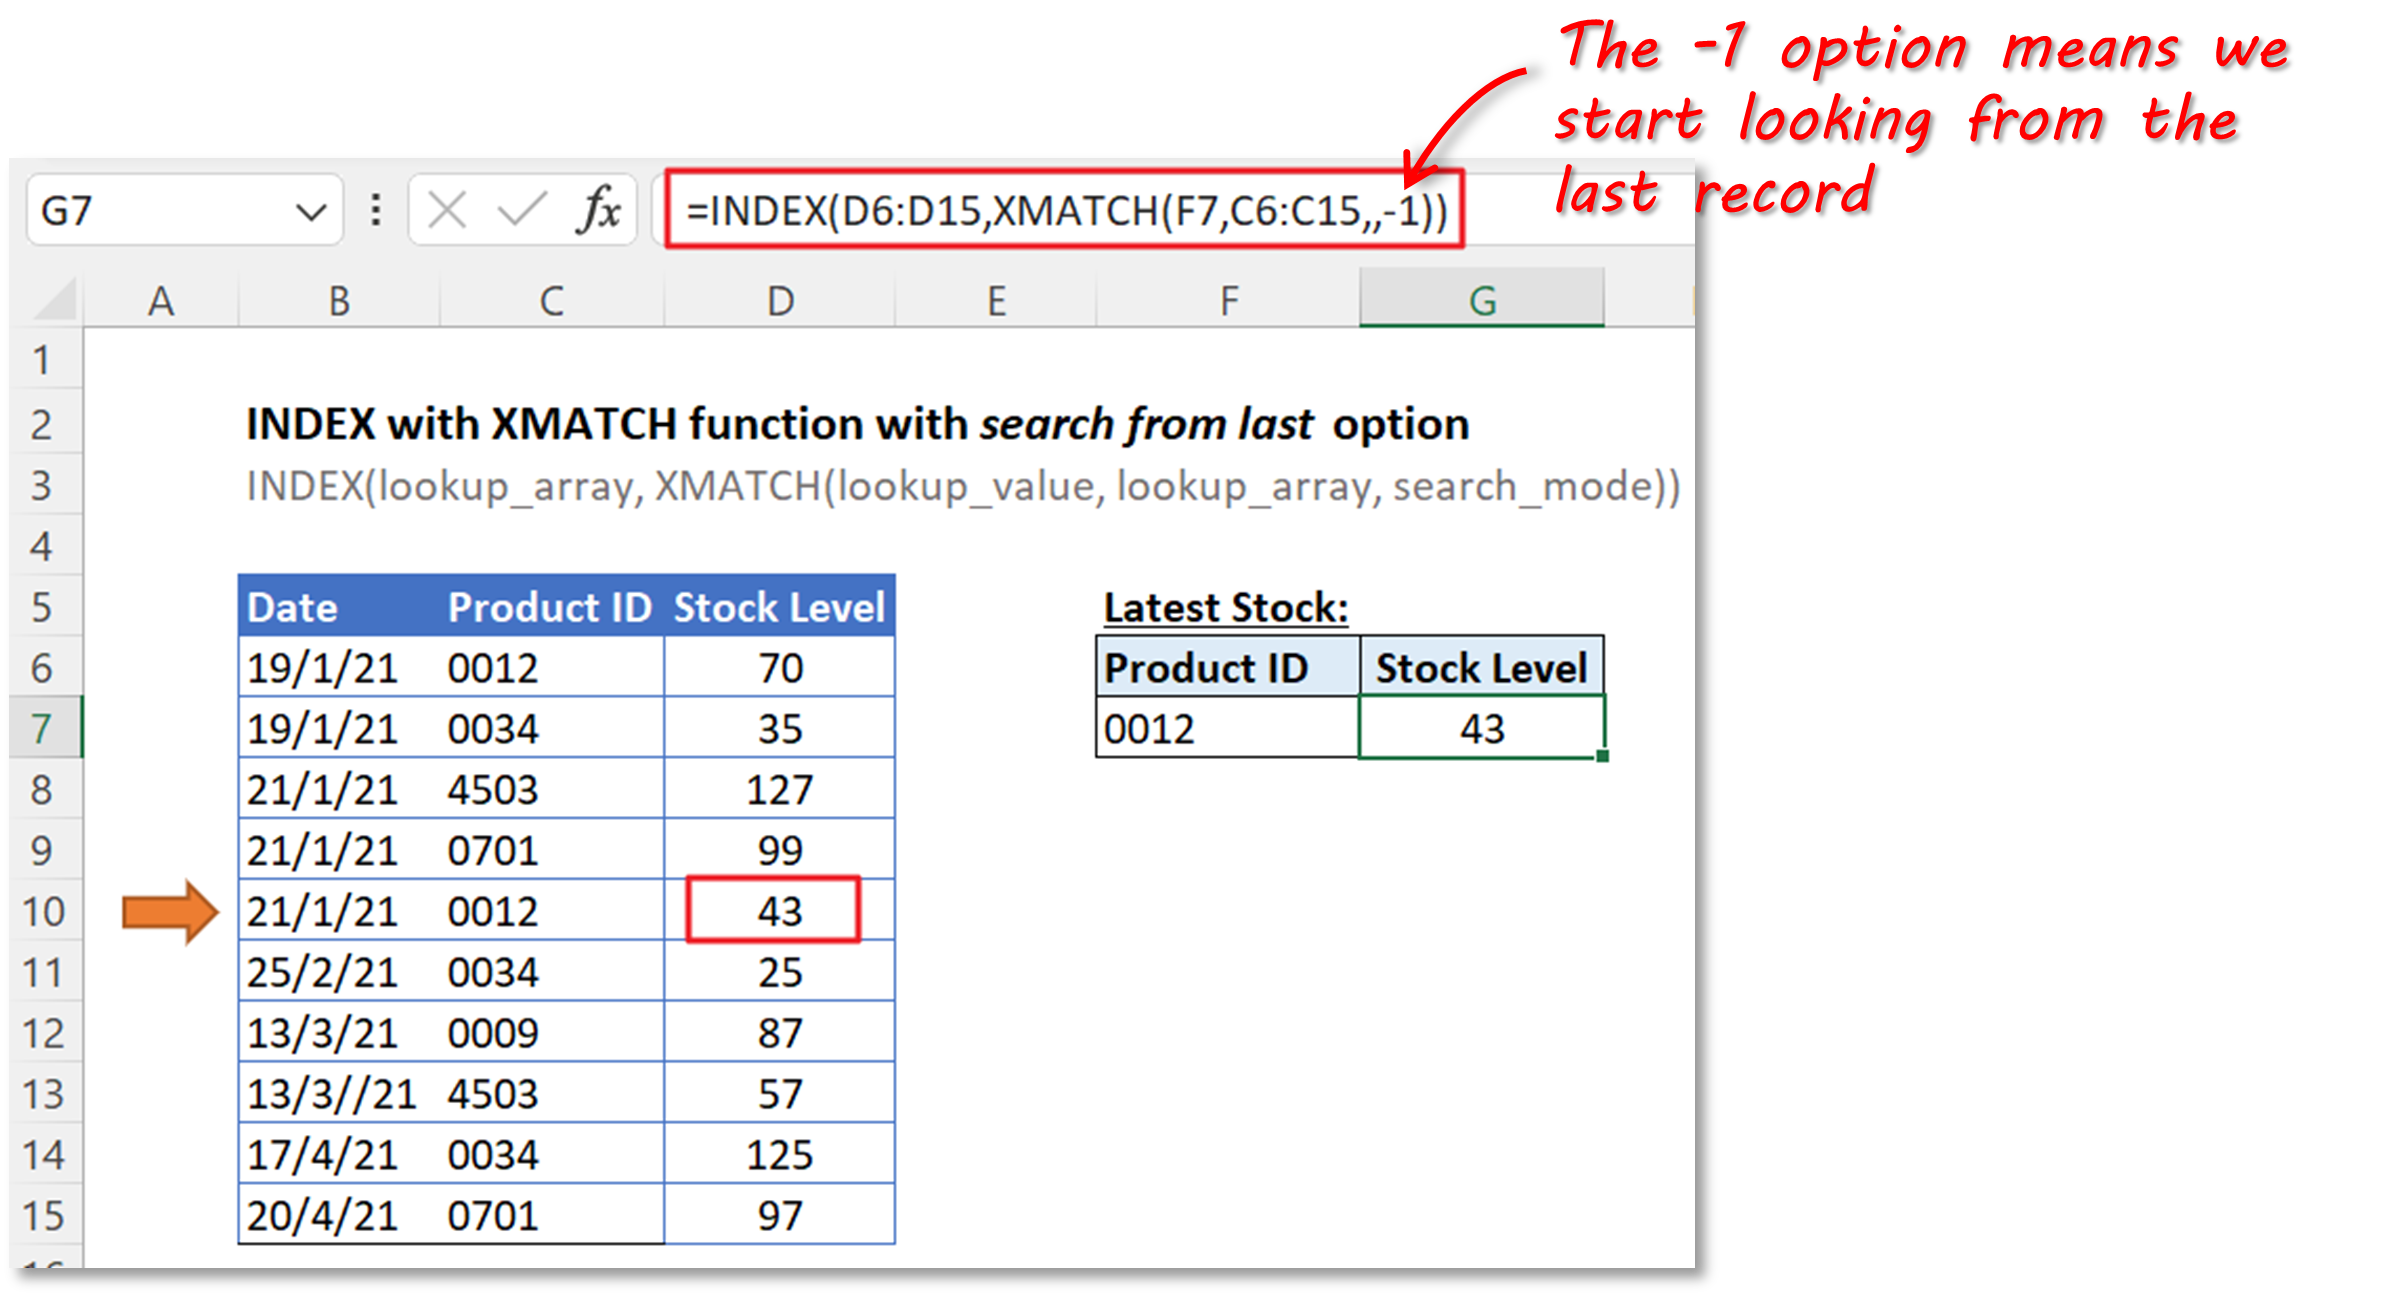 XMATCH with index and search from last